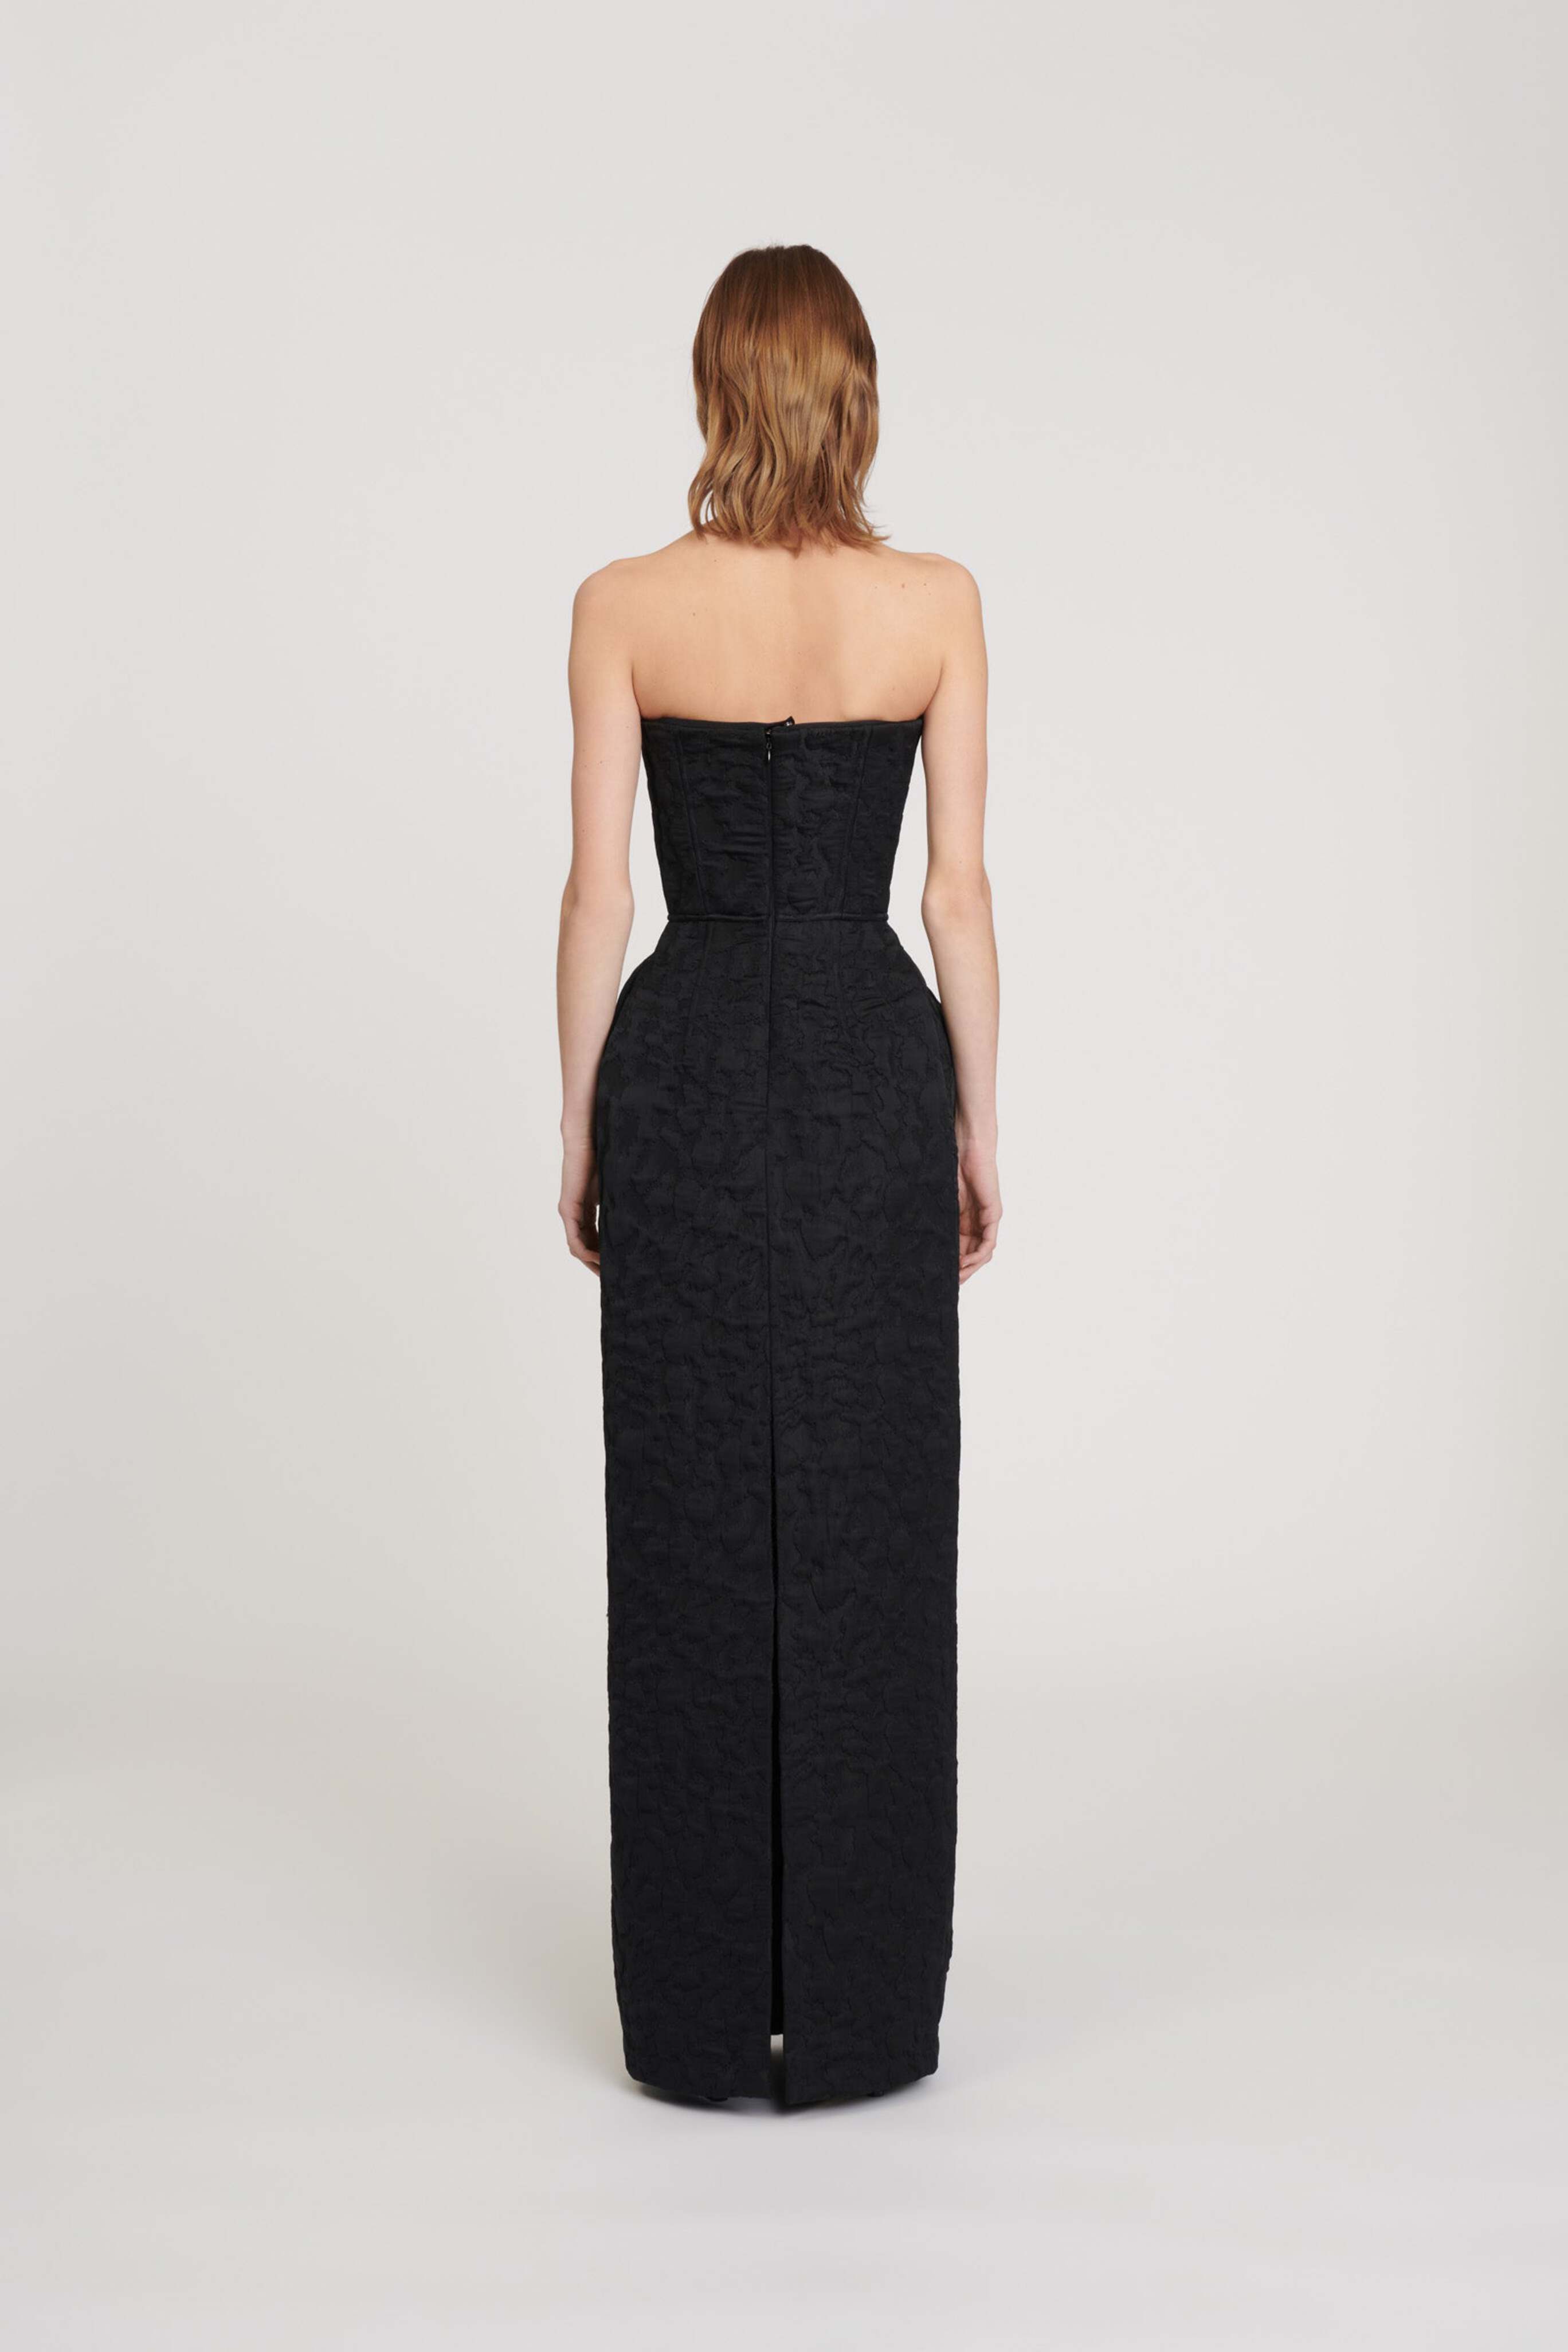 Jacquard Strapless Gown